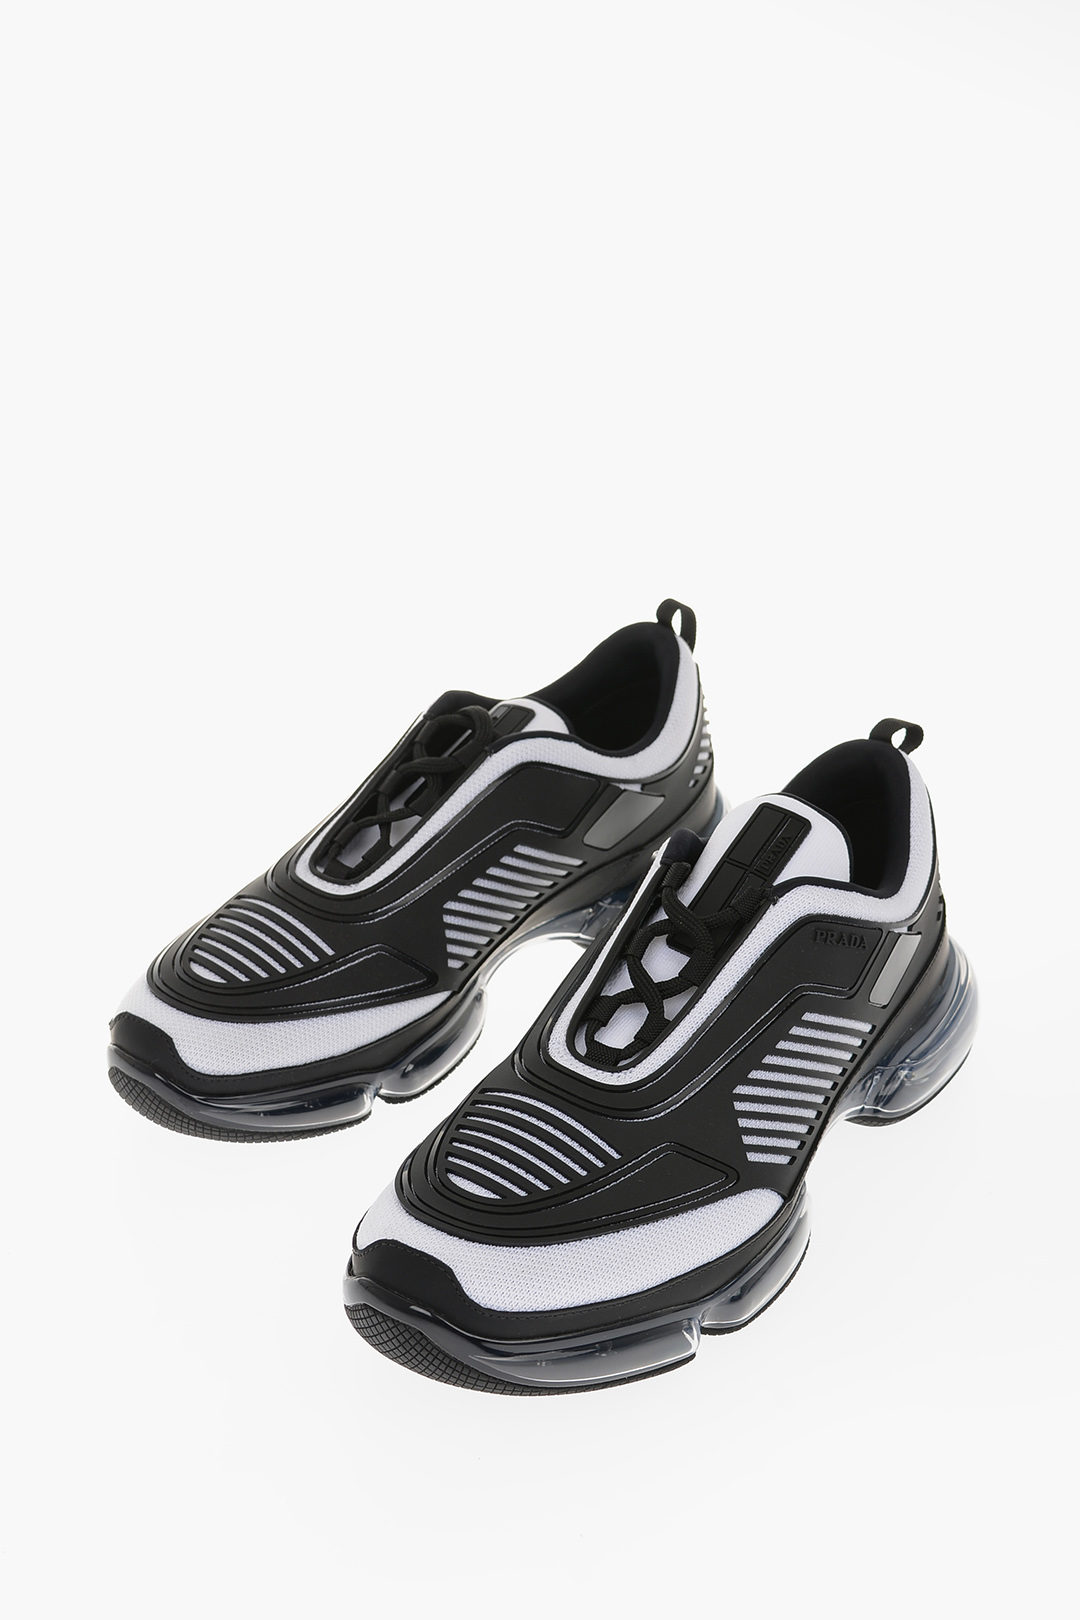 prada shoes with air bubble